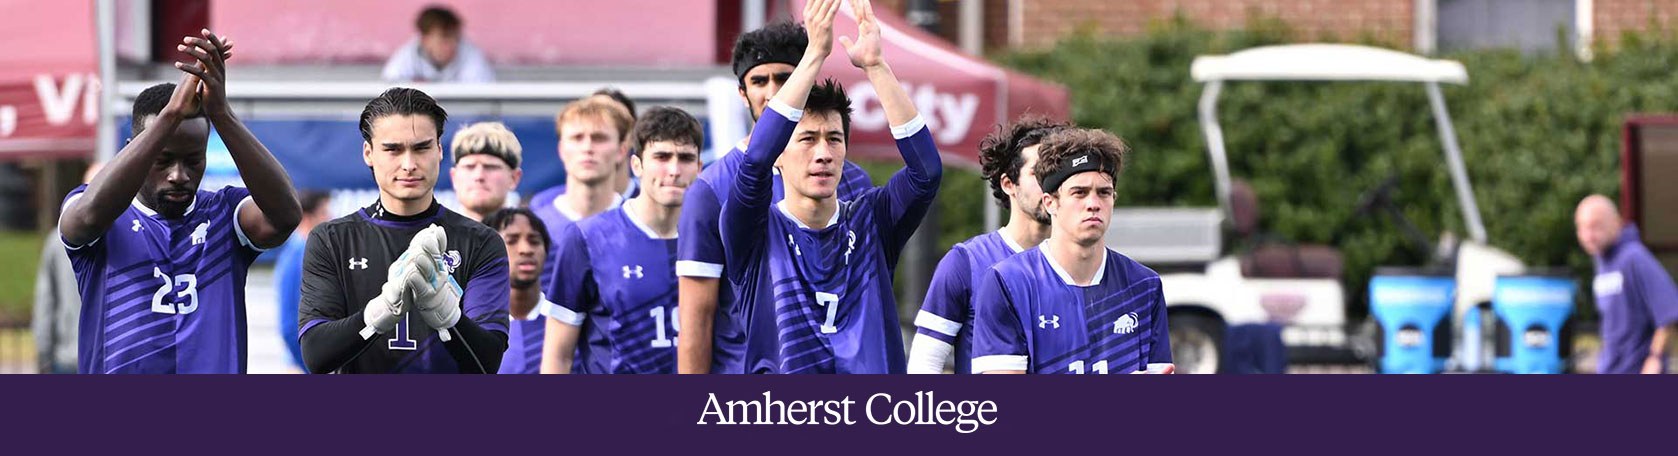 The Amherst men's soccer team congratulate St. Olaf on their NCAA Division III win.